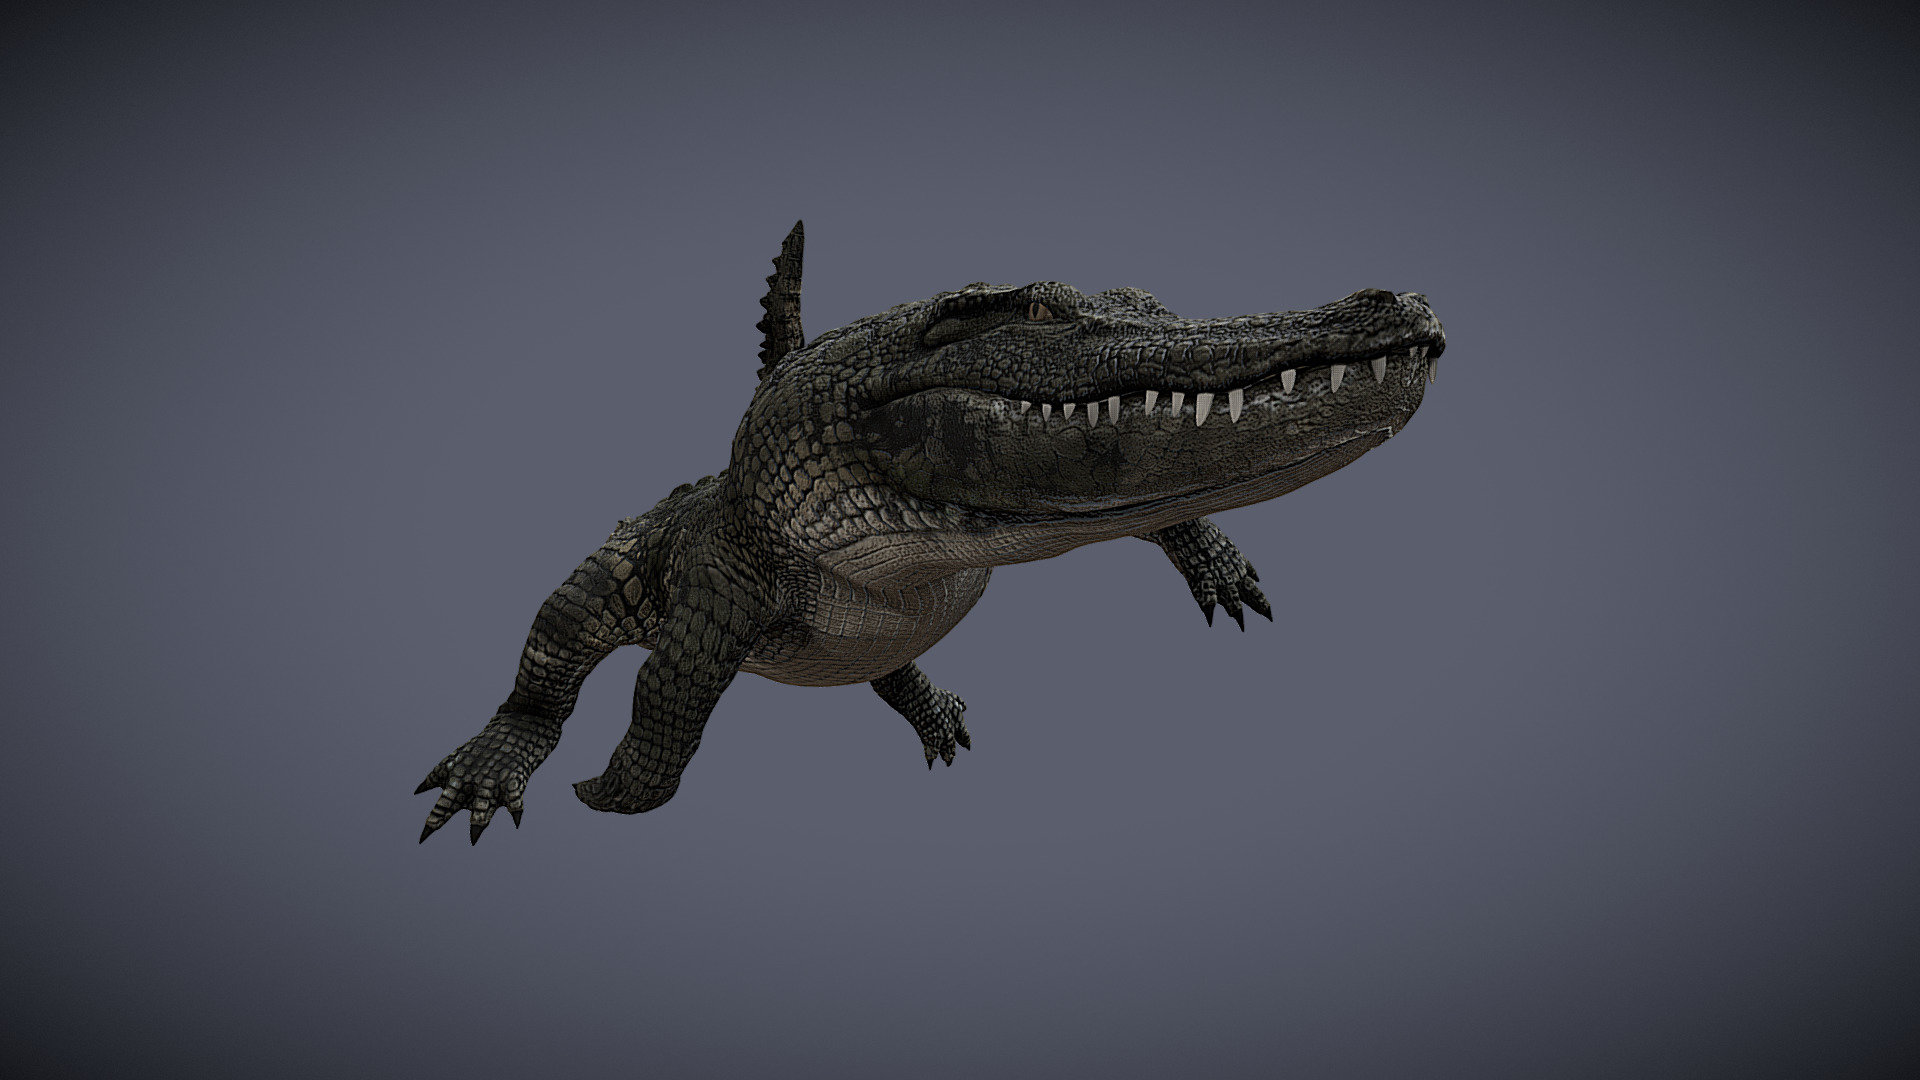 My new Alligator 3D model, rigged and textured starting from scratch with ZBrush. Available at DAZ Store 3d model